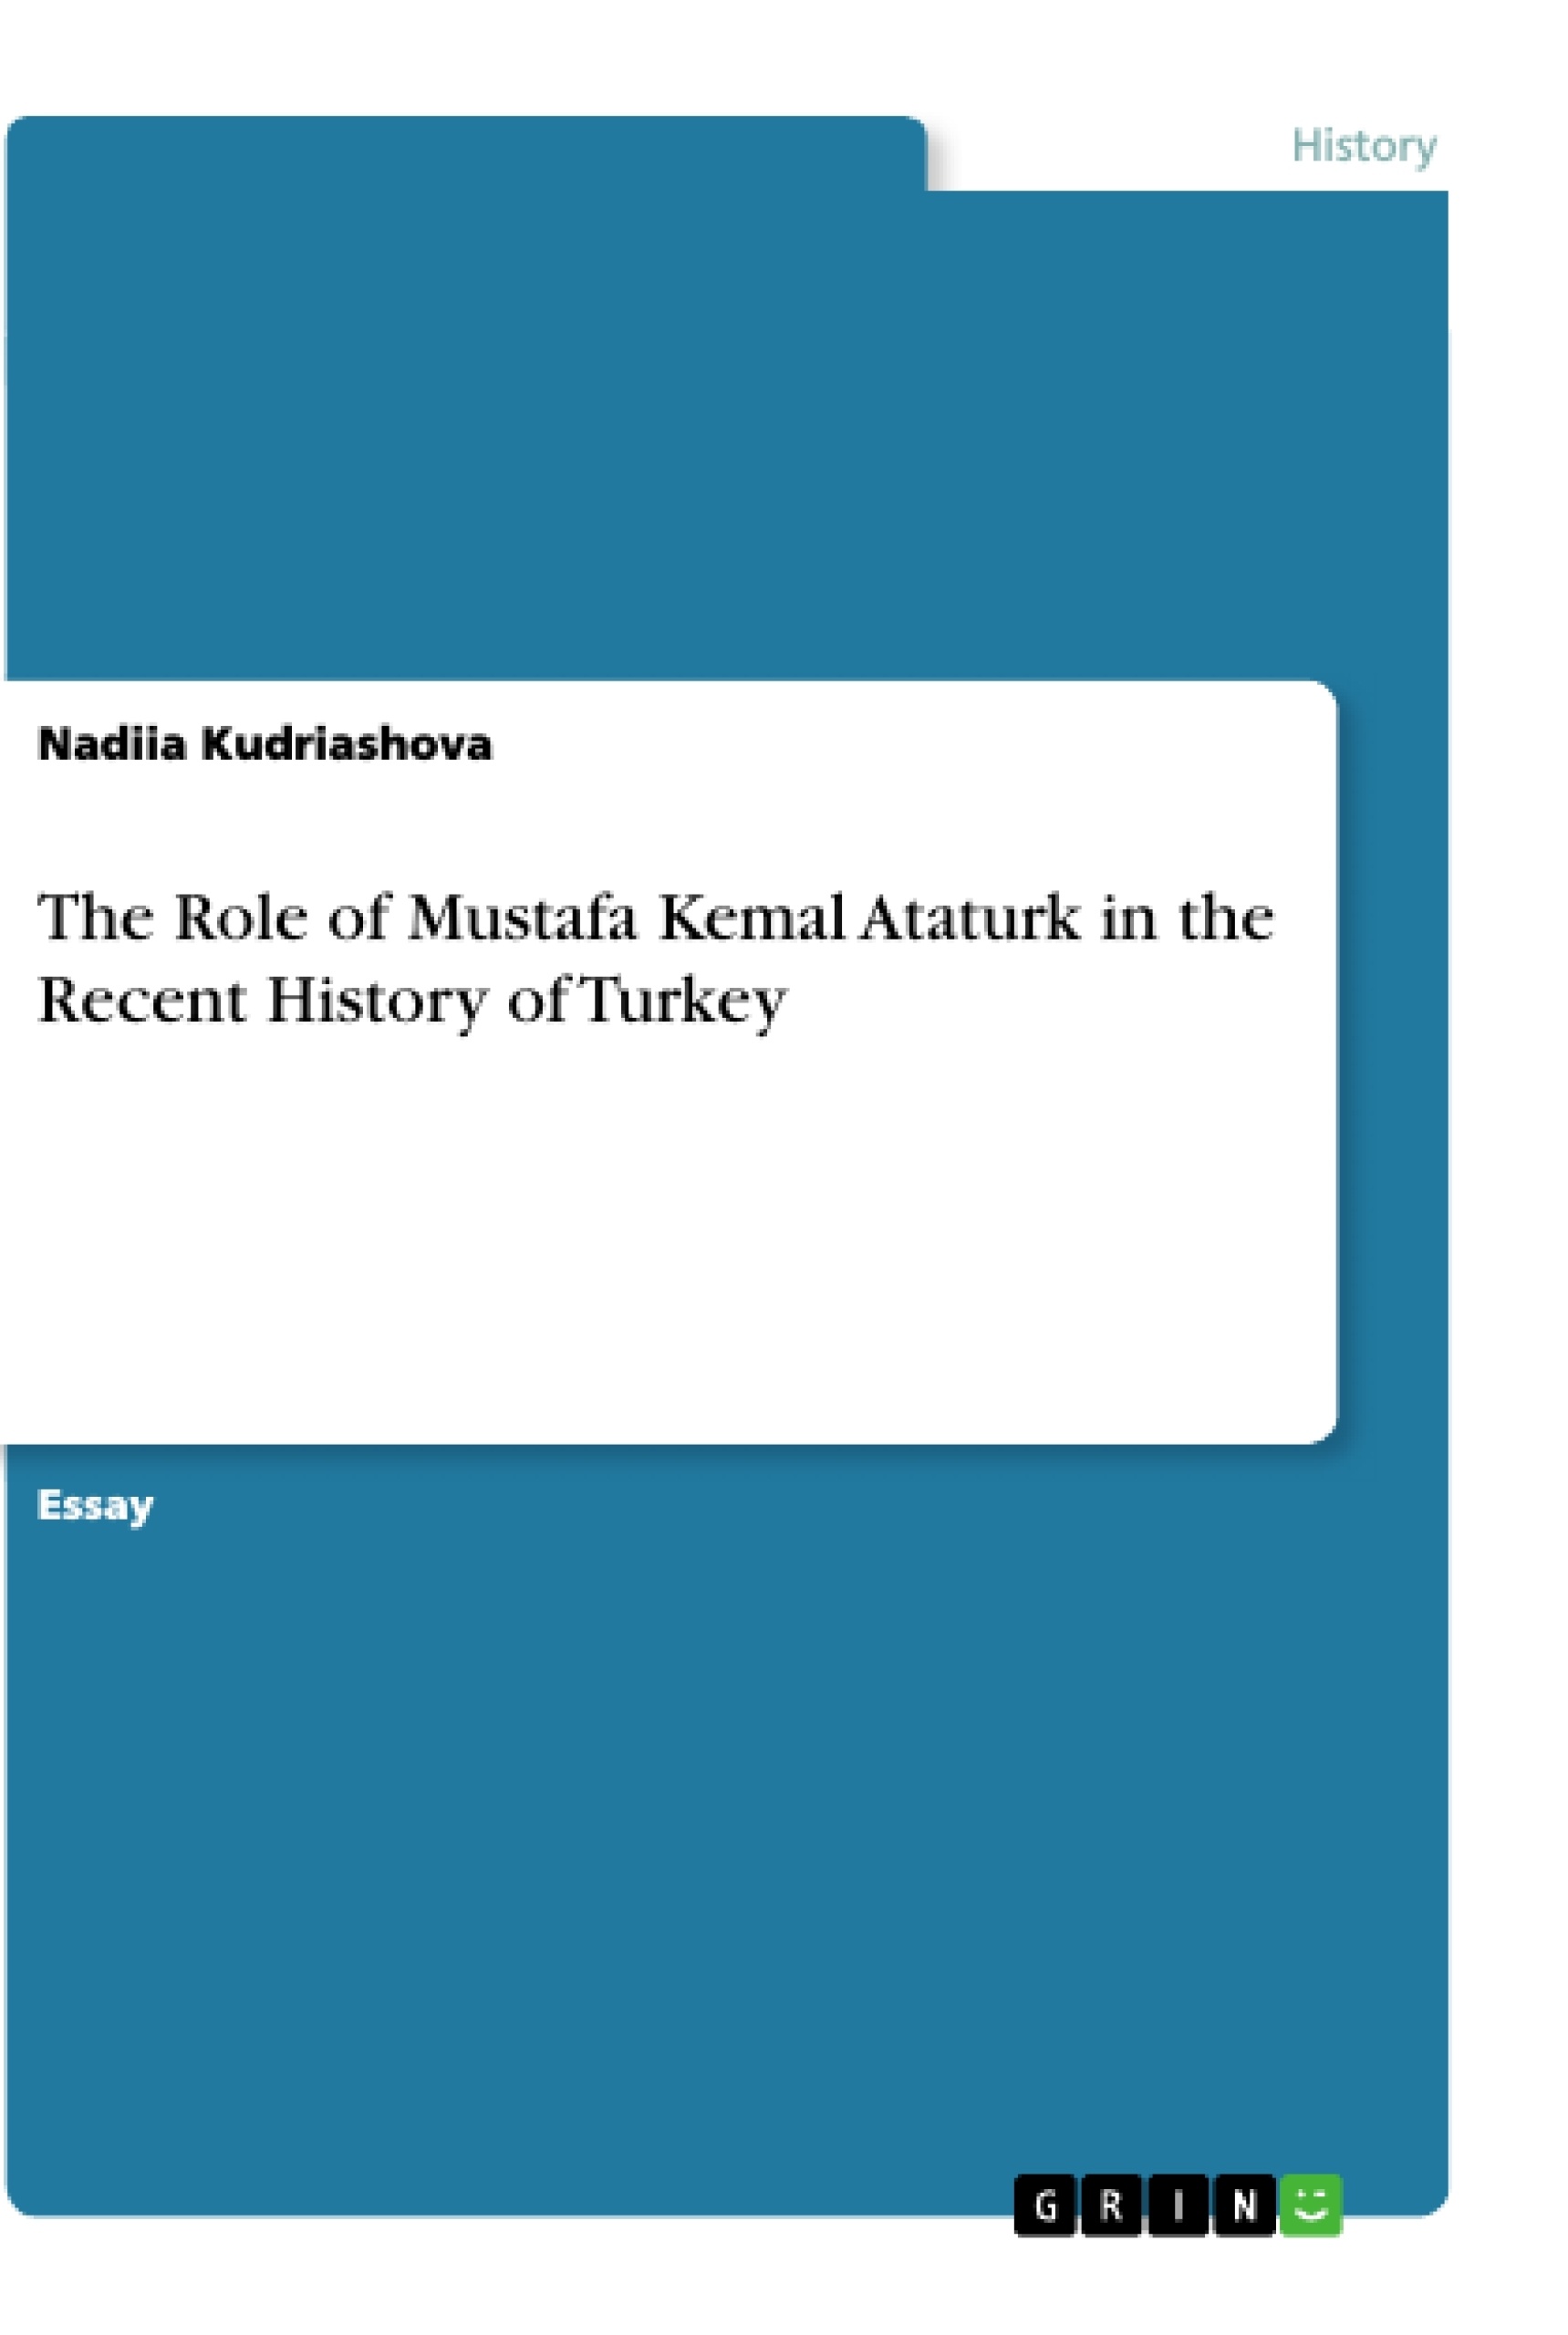 Titre: The Role of Mustafa Kemal Ataturk in the Recent History of Turkey